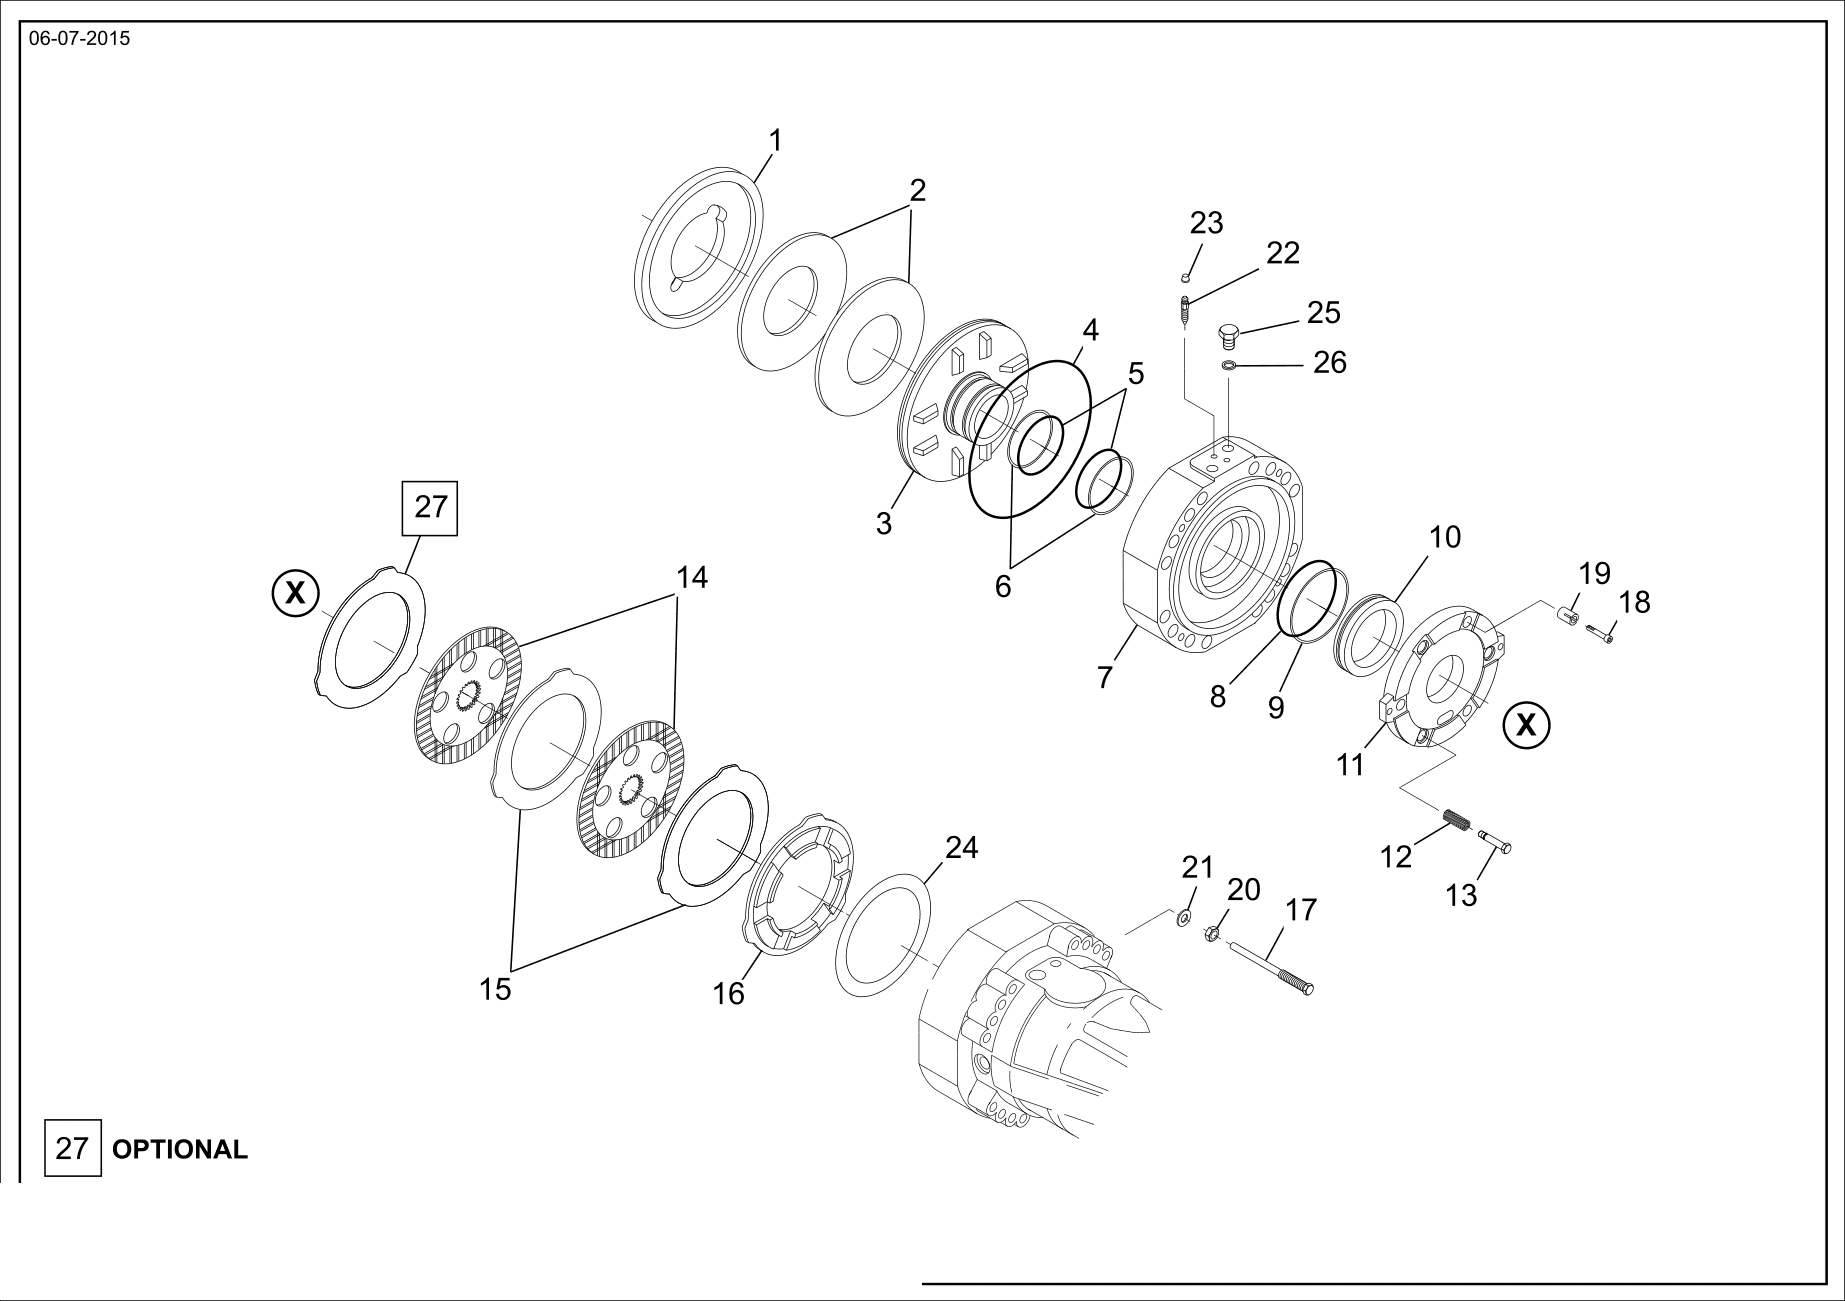 drawing for CNH NEW HOLLAND 87701531 - BOLT (figure 4)